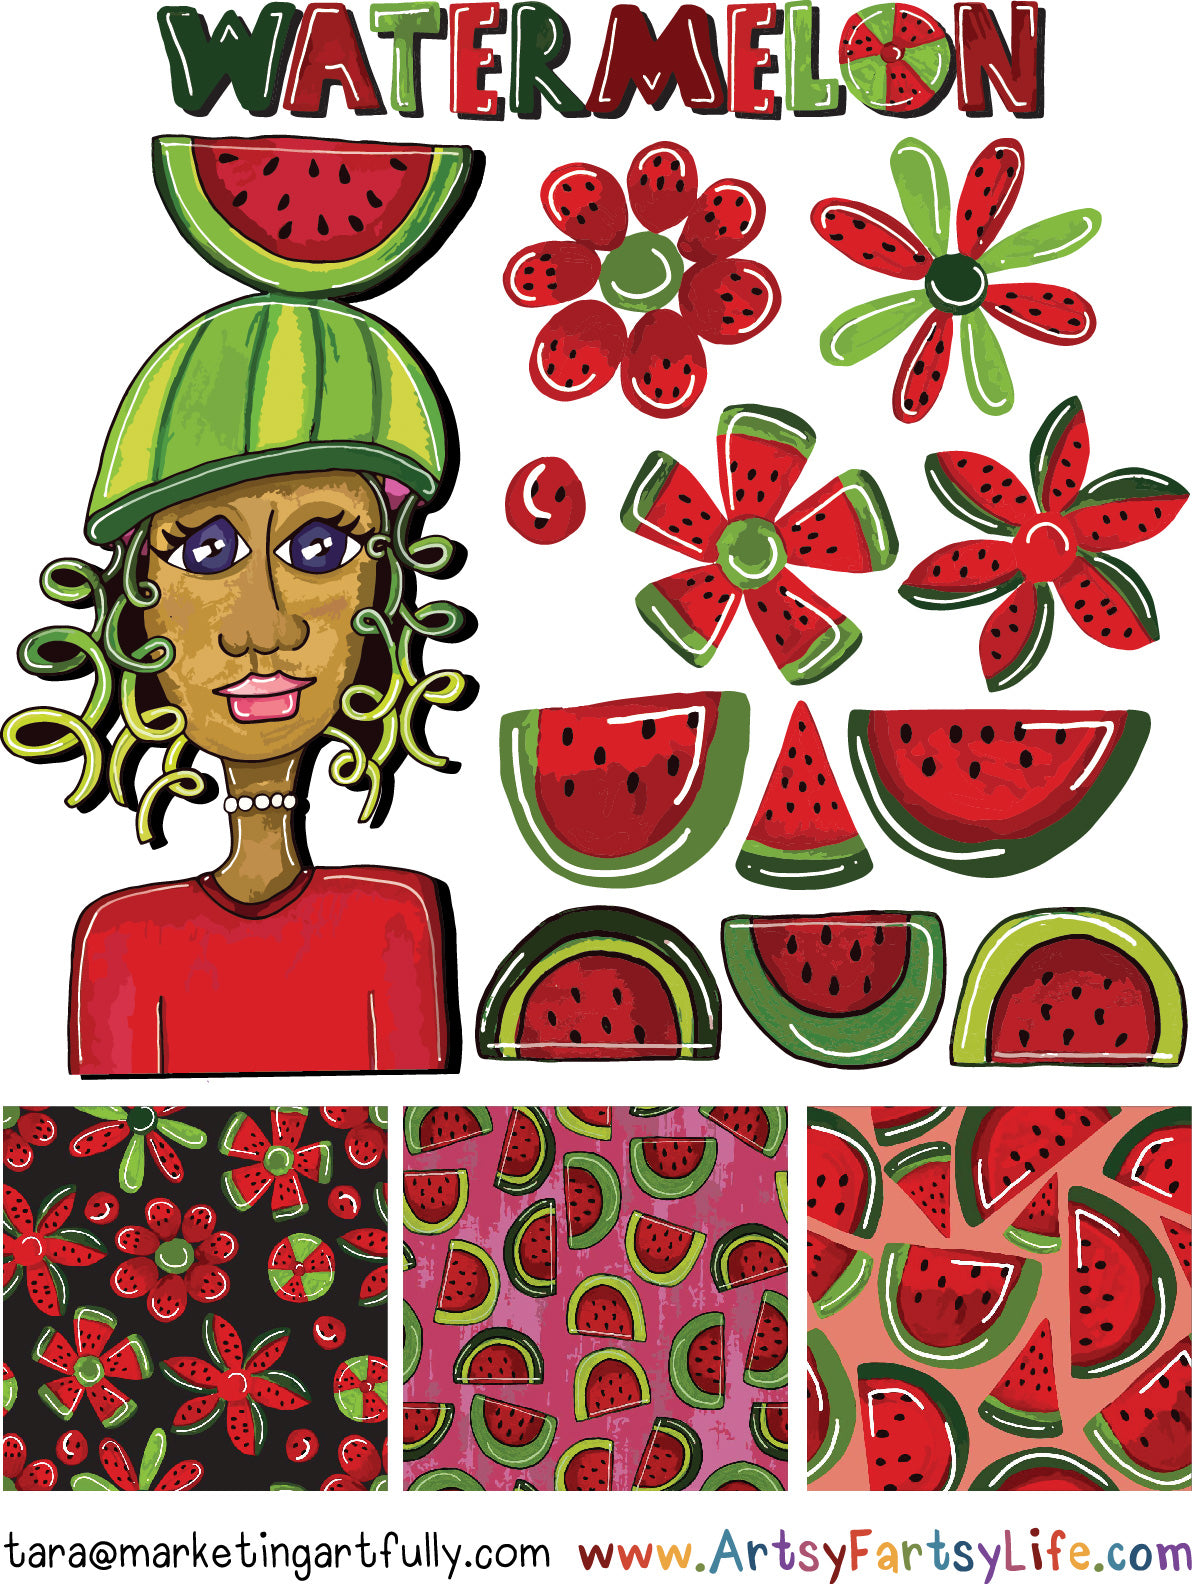 Watermelon Woman Surface Design For Craft Supplies